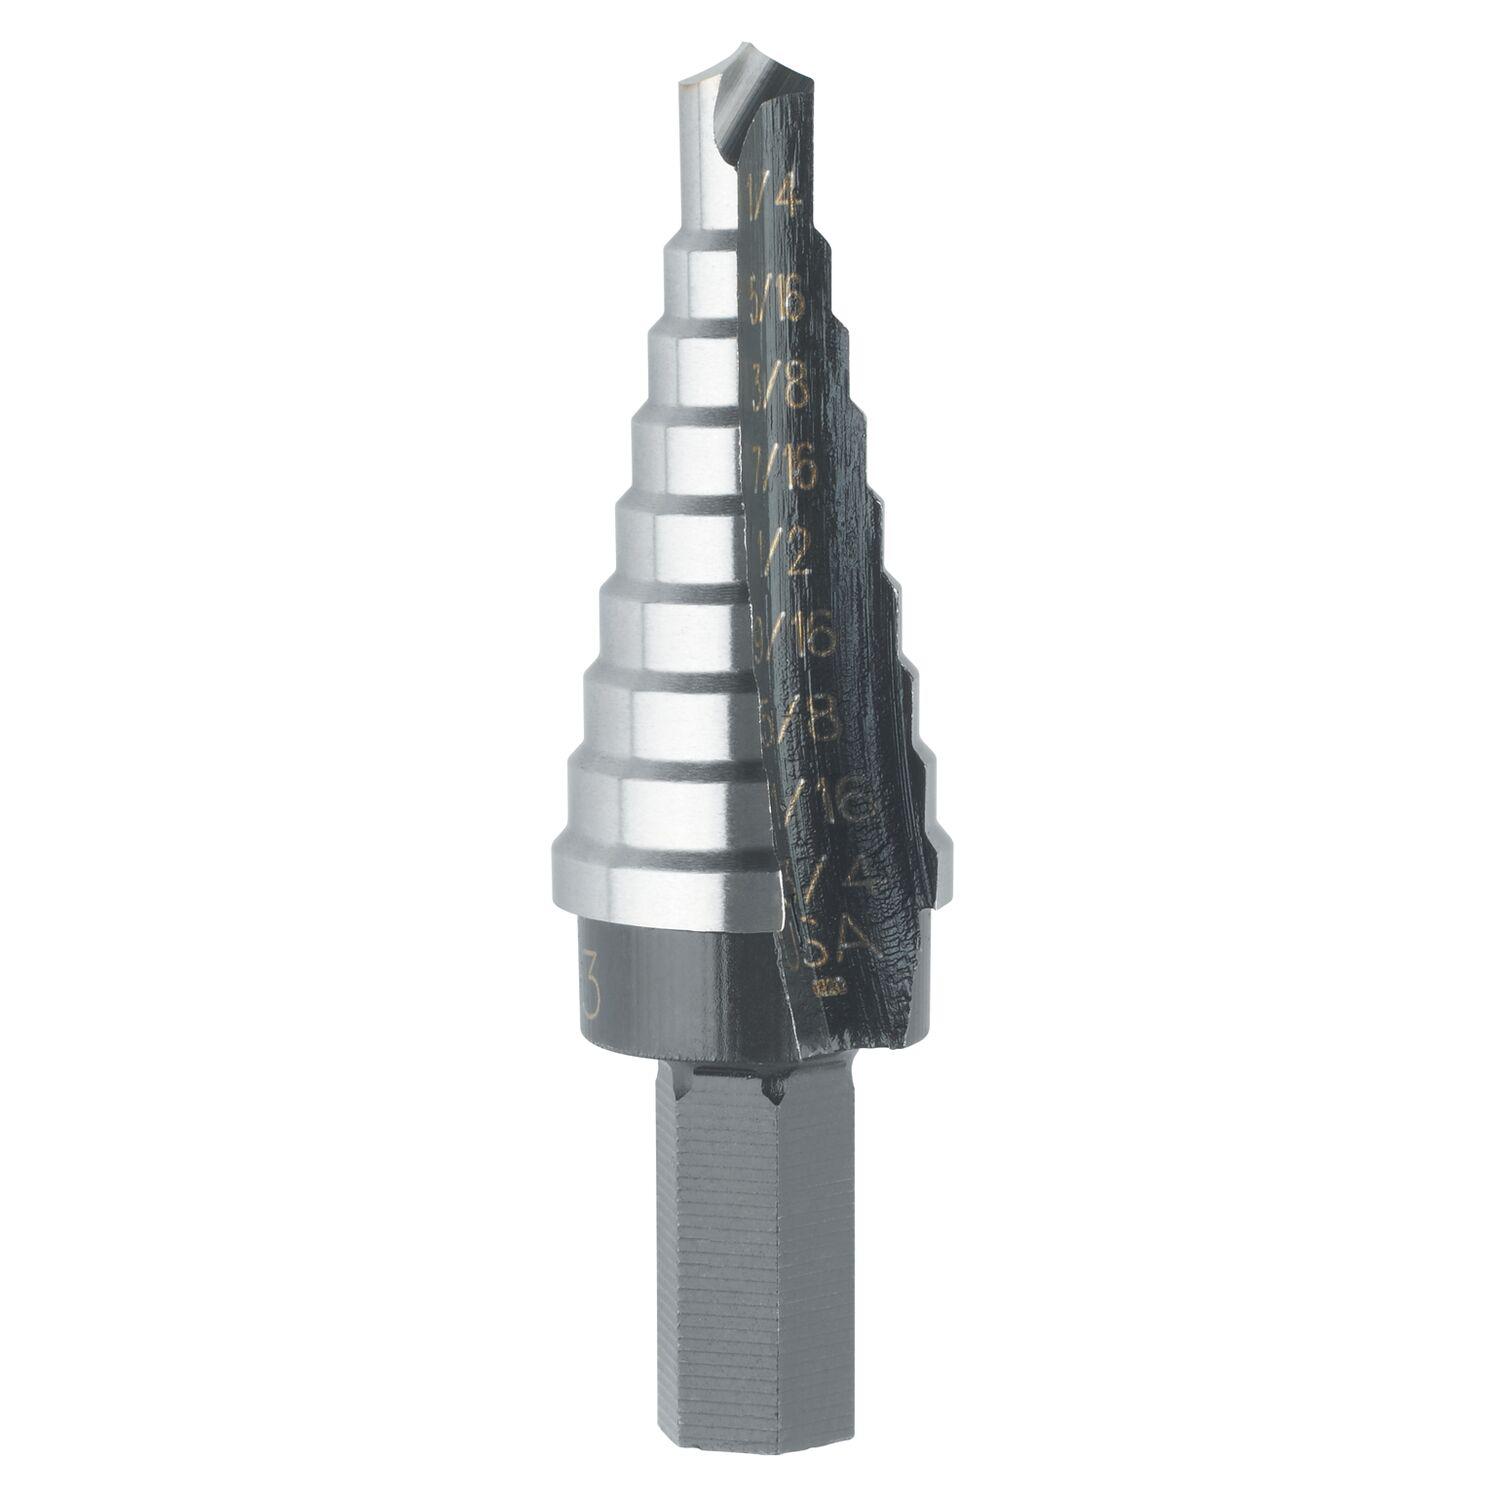 Irwin® Unibit® 10231CB Step Drill Bit, 1/8 in Dia Min Hole, 1/2 in Dia Max Hole, 13 Steps, M35 HSS-Co 5, 13 Hole Sizes, 1/4 in Shank